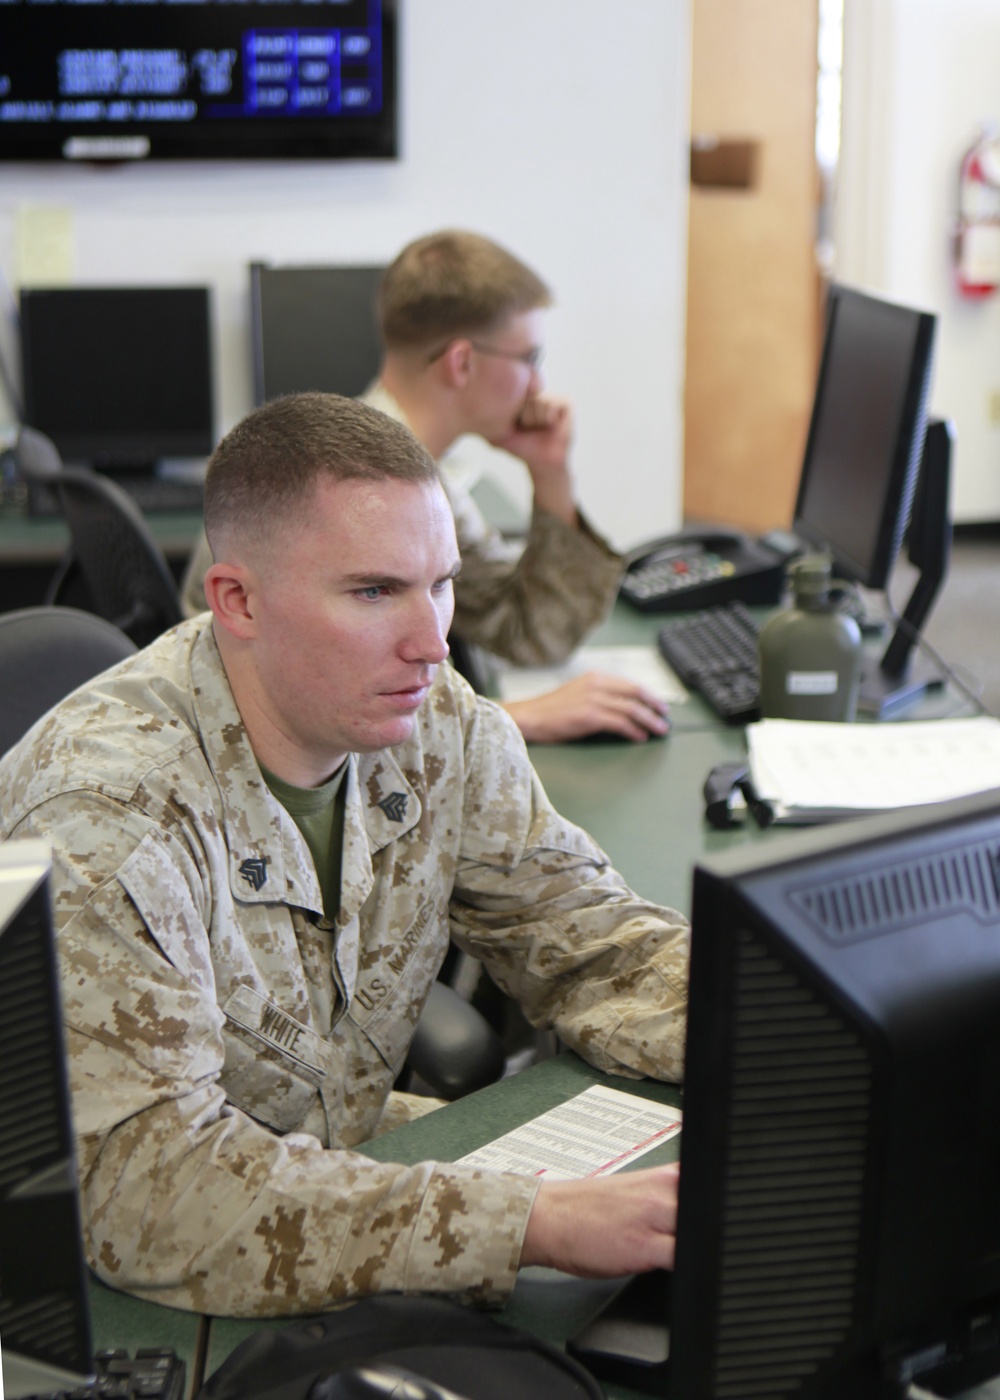 Marine weather forecasters support mission readiness